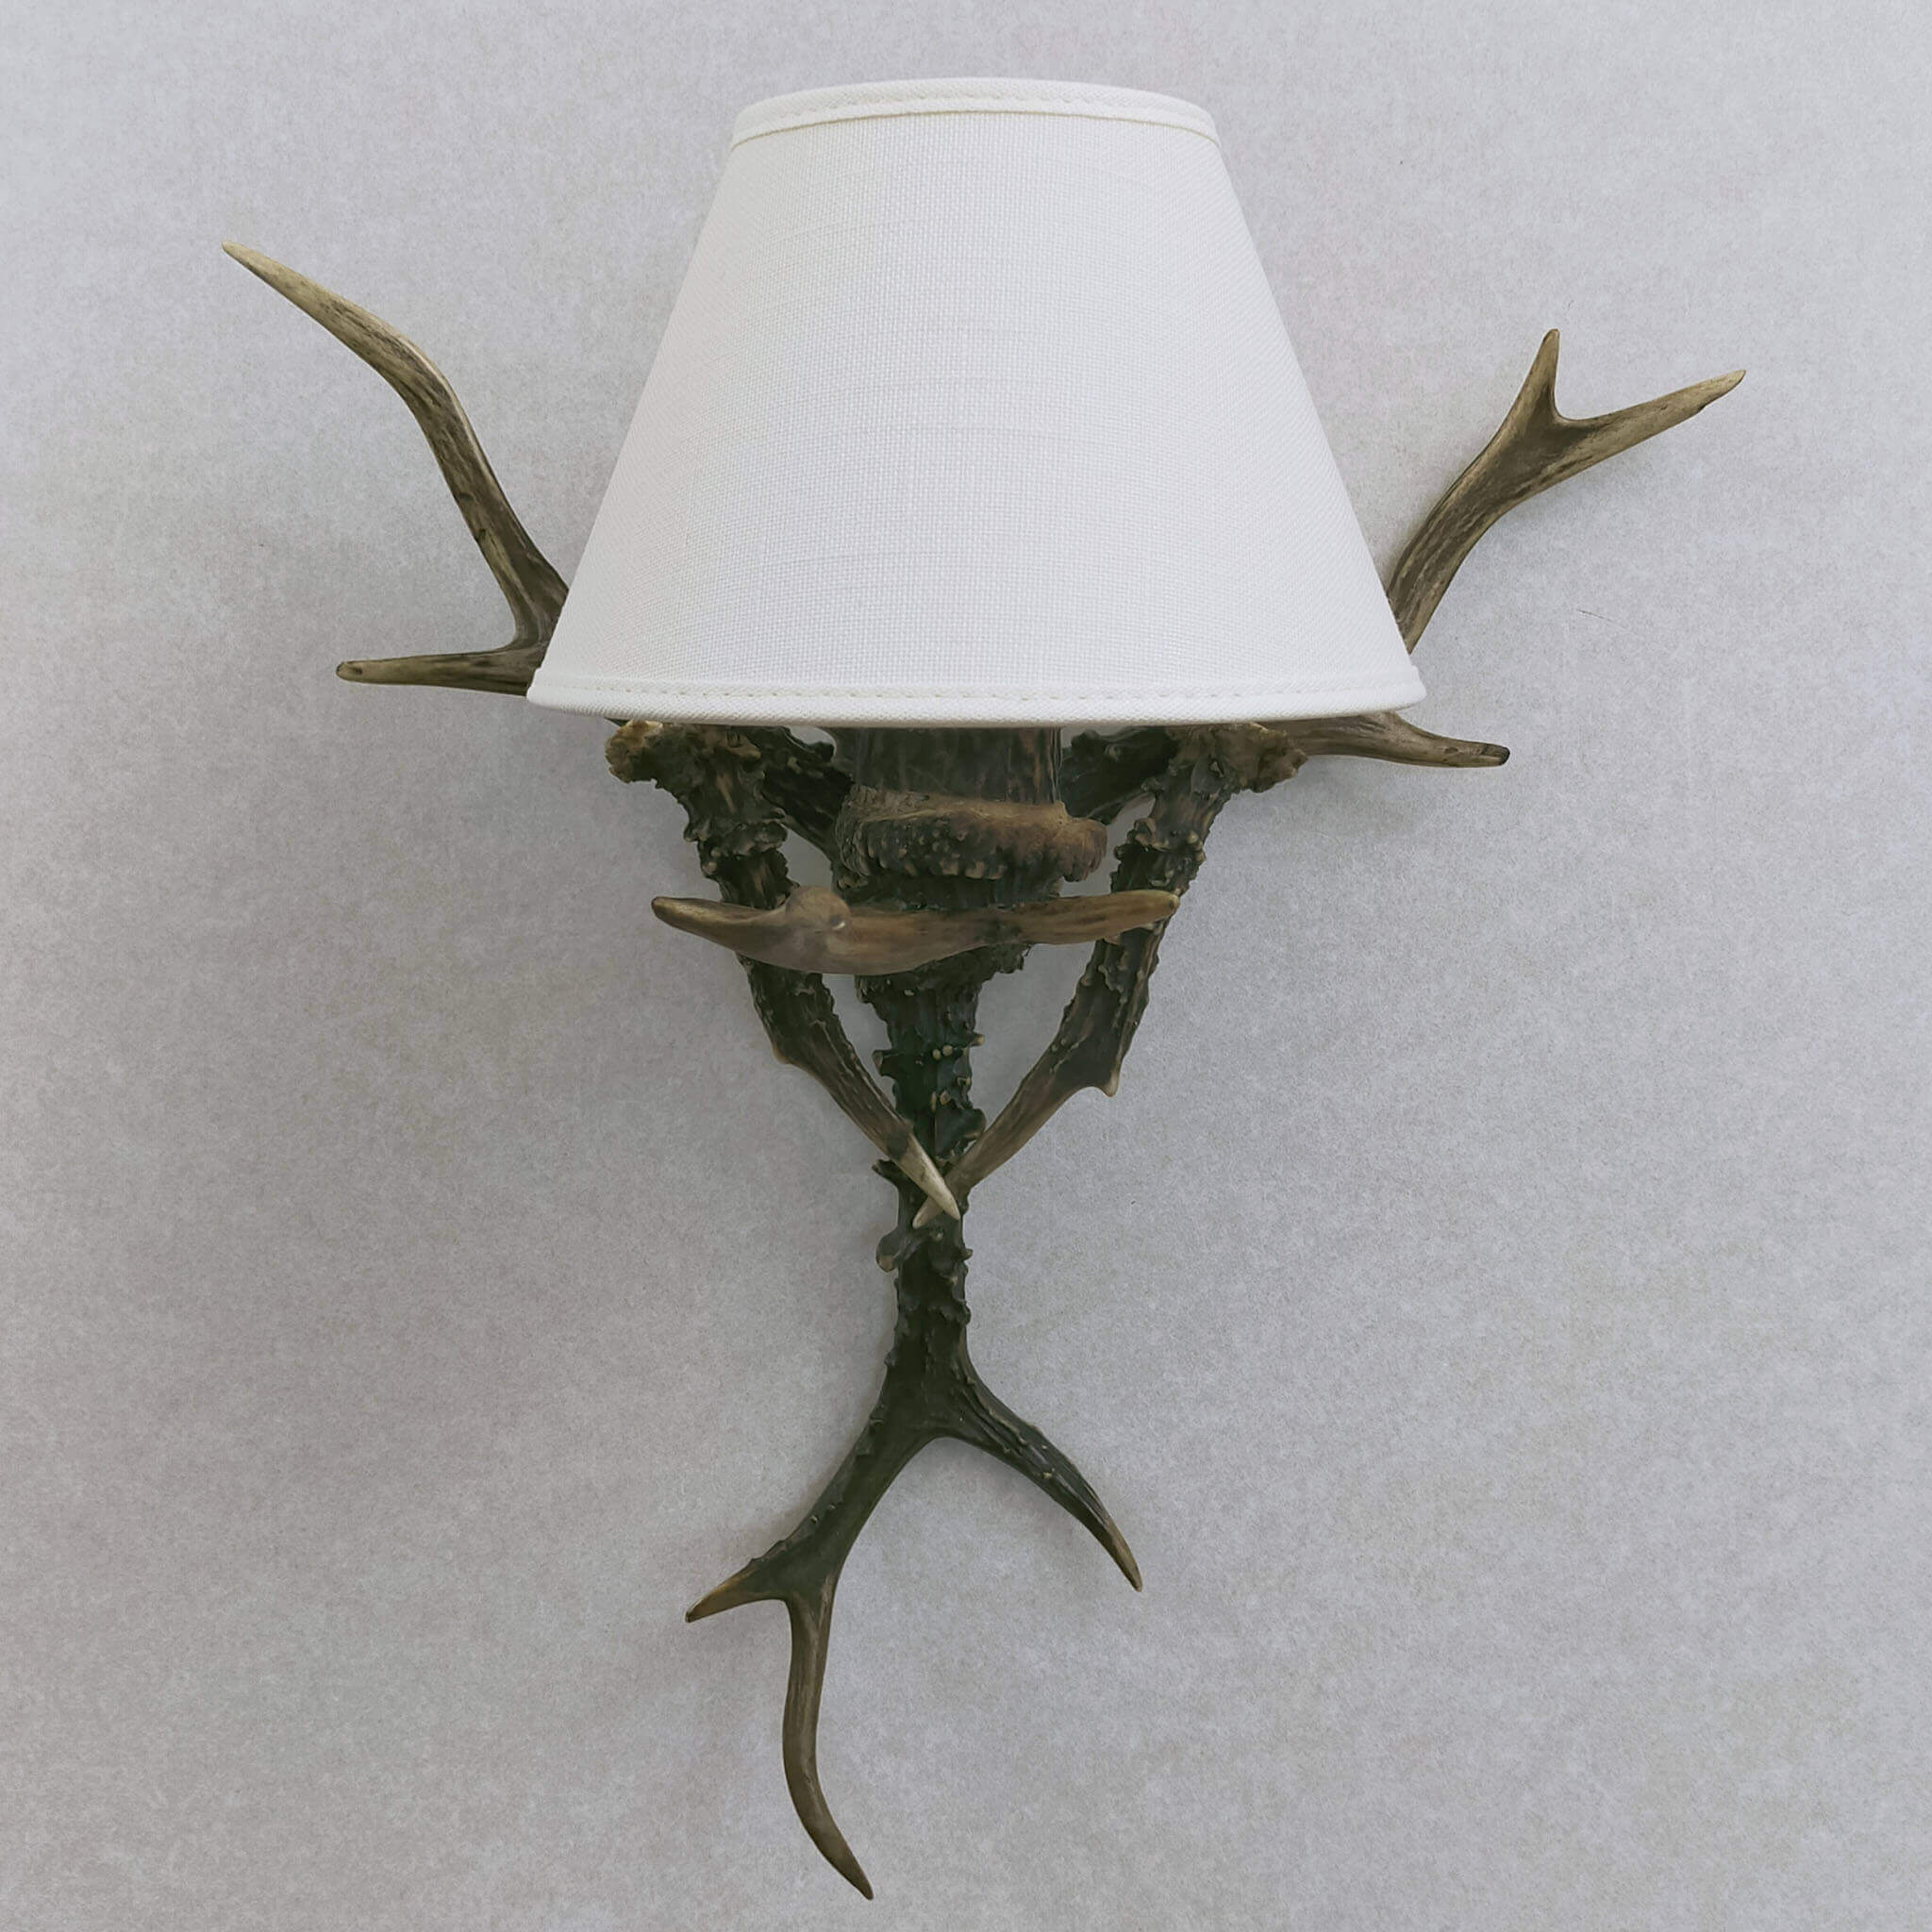 Real small antler sconce with shade.